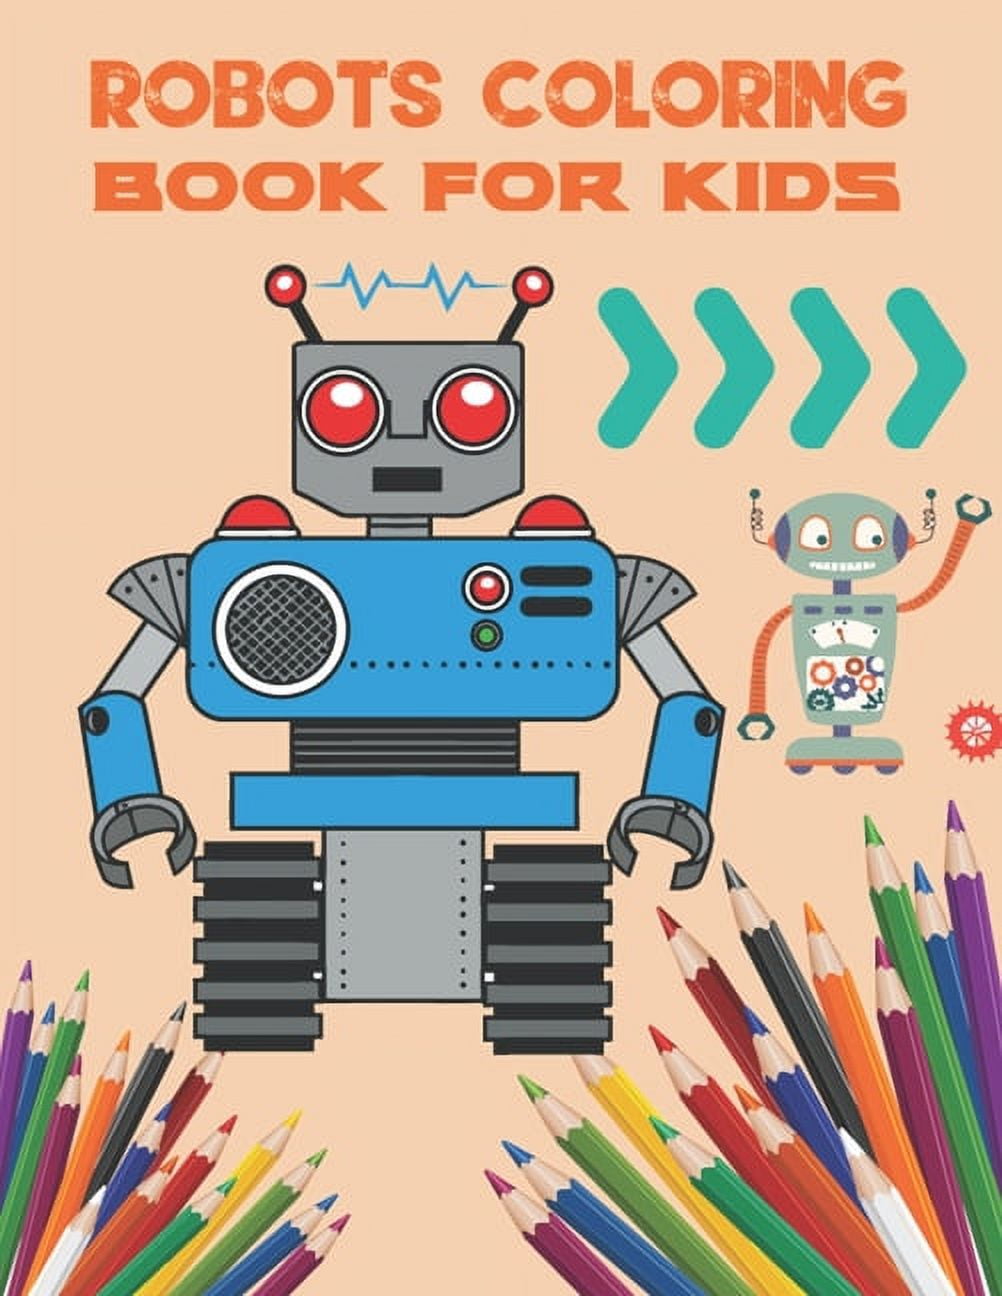 Robot Coloring Book for Toddlers: Explore, Fun with Learn and Grow, Robot Coloring Book for Kids (a Really Best Relaxing Colouring Book for Boys, Robot, Fun, Coloring, Boys,  Kids Coloring Books Ages 2-4, 4-8, 9-12) Amazing Gifts for Toddlers Boy [Book]